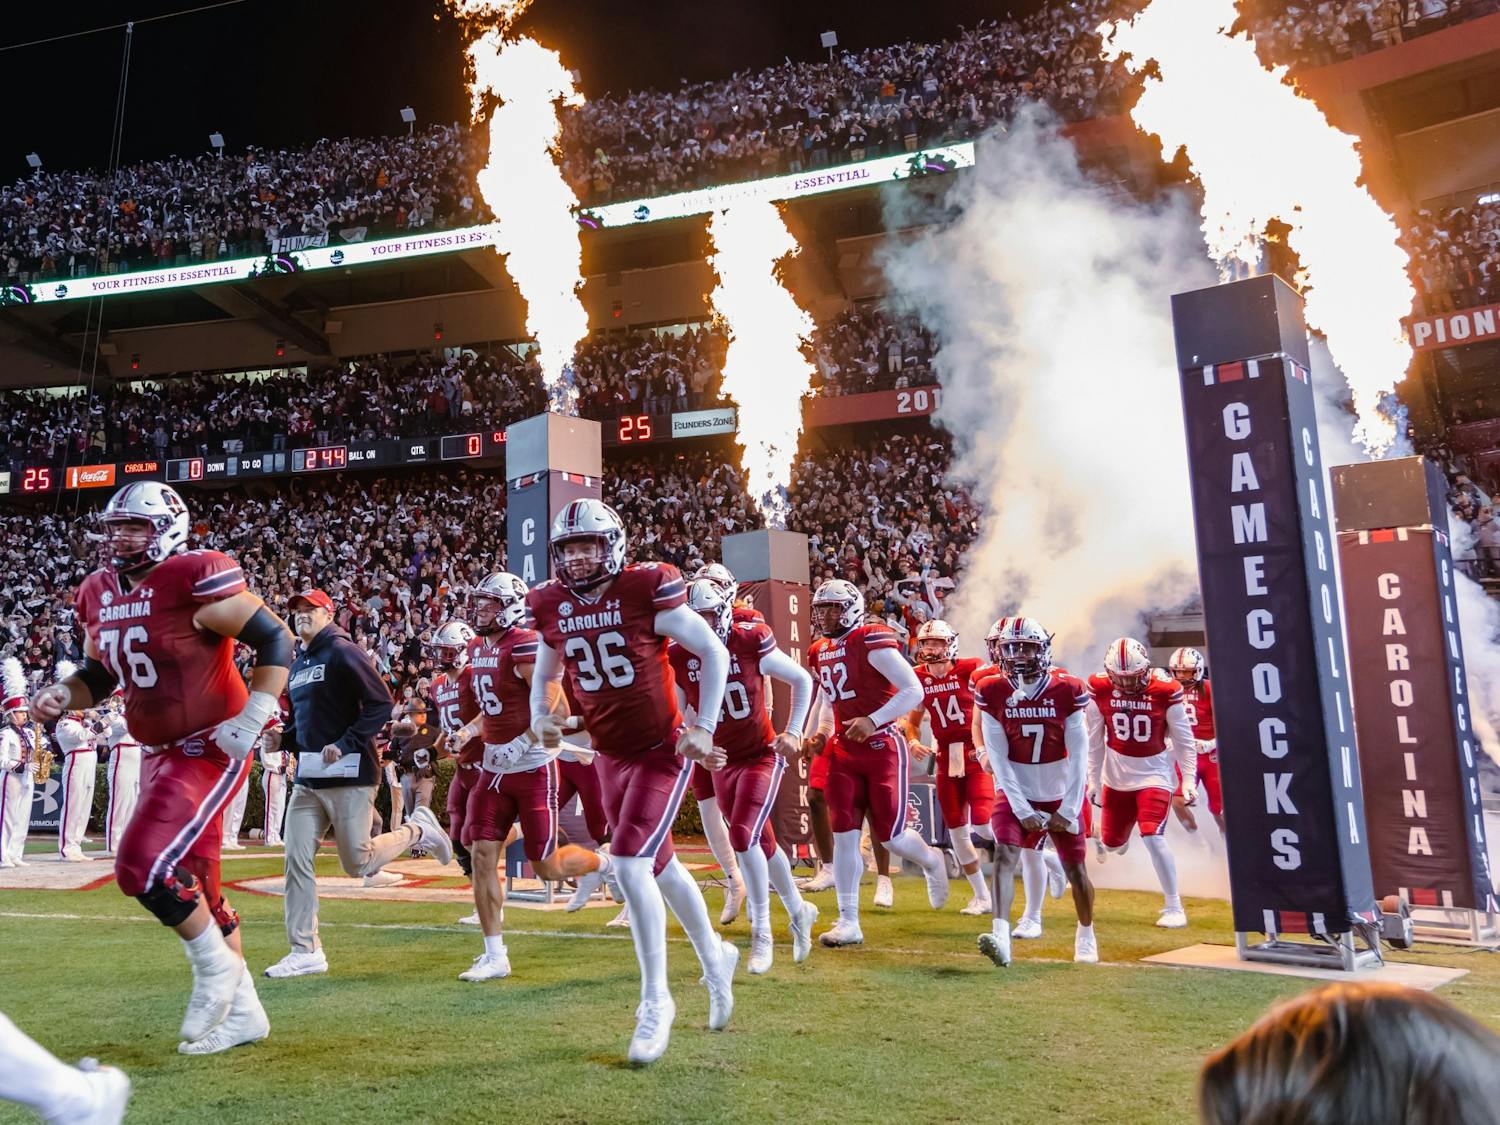 The South Carolina Gamecocks and Head Football Coach Shane Beamer enter the field as they get ready to play against the Clemson Tigers for the Palmetto Bowl on Nov. 27, 2021.&nbsp;